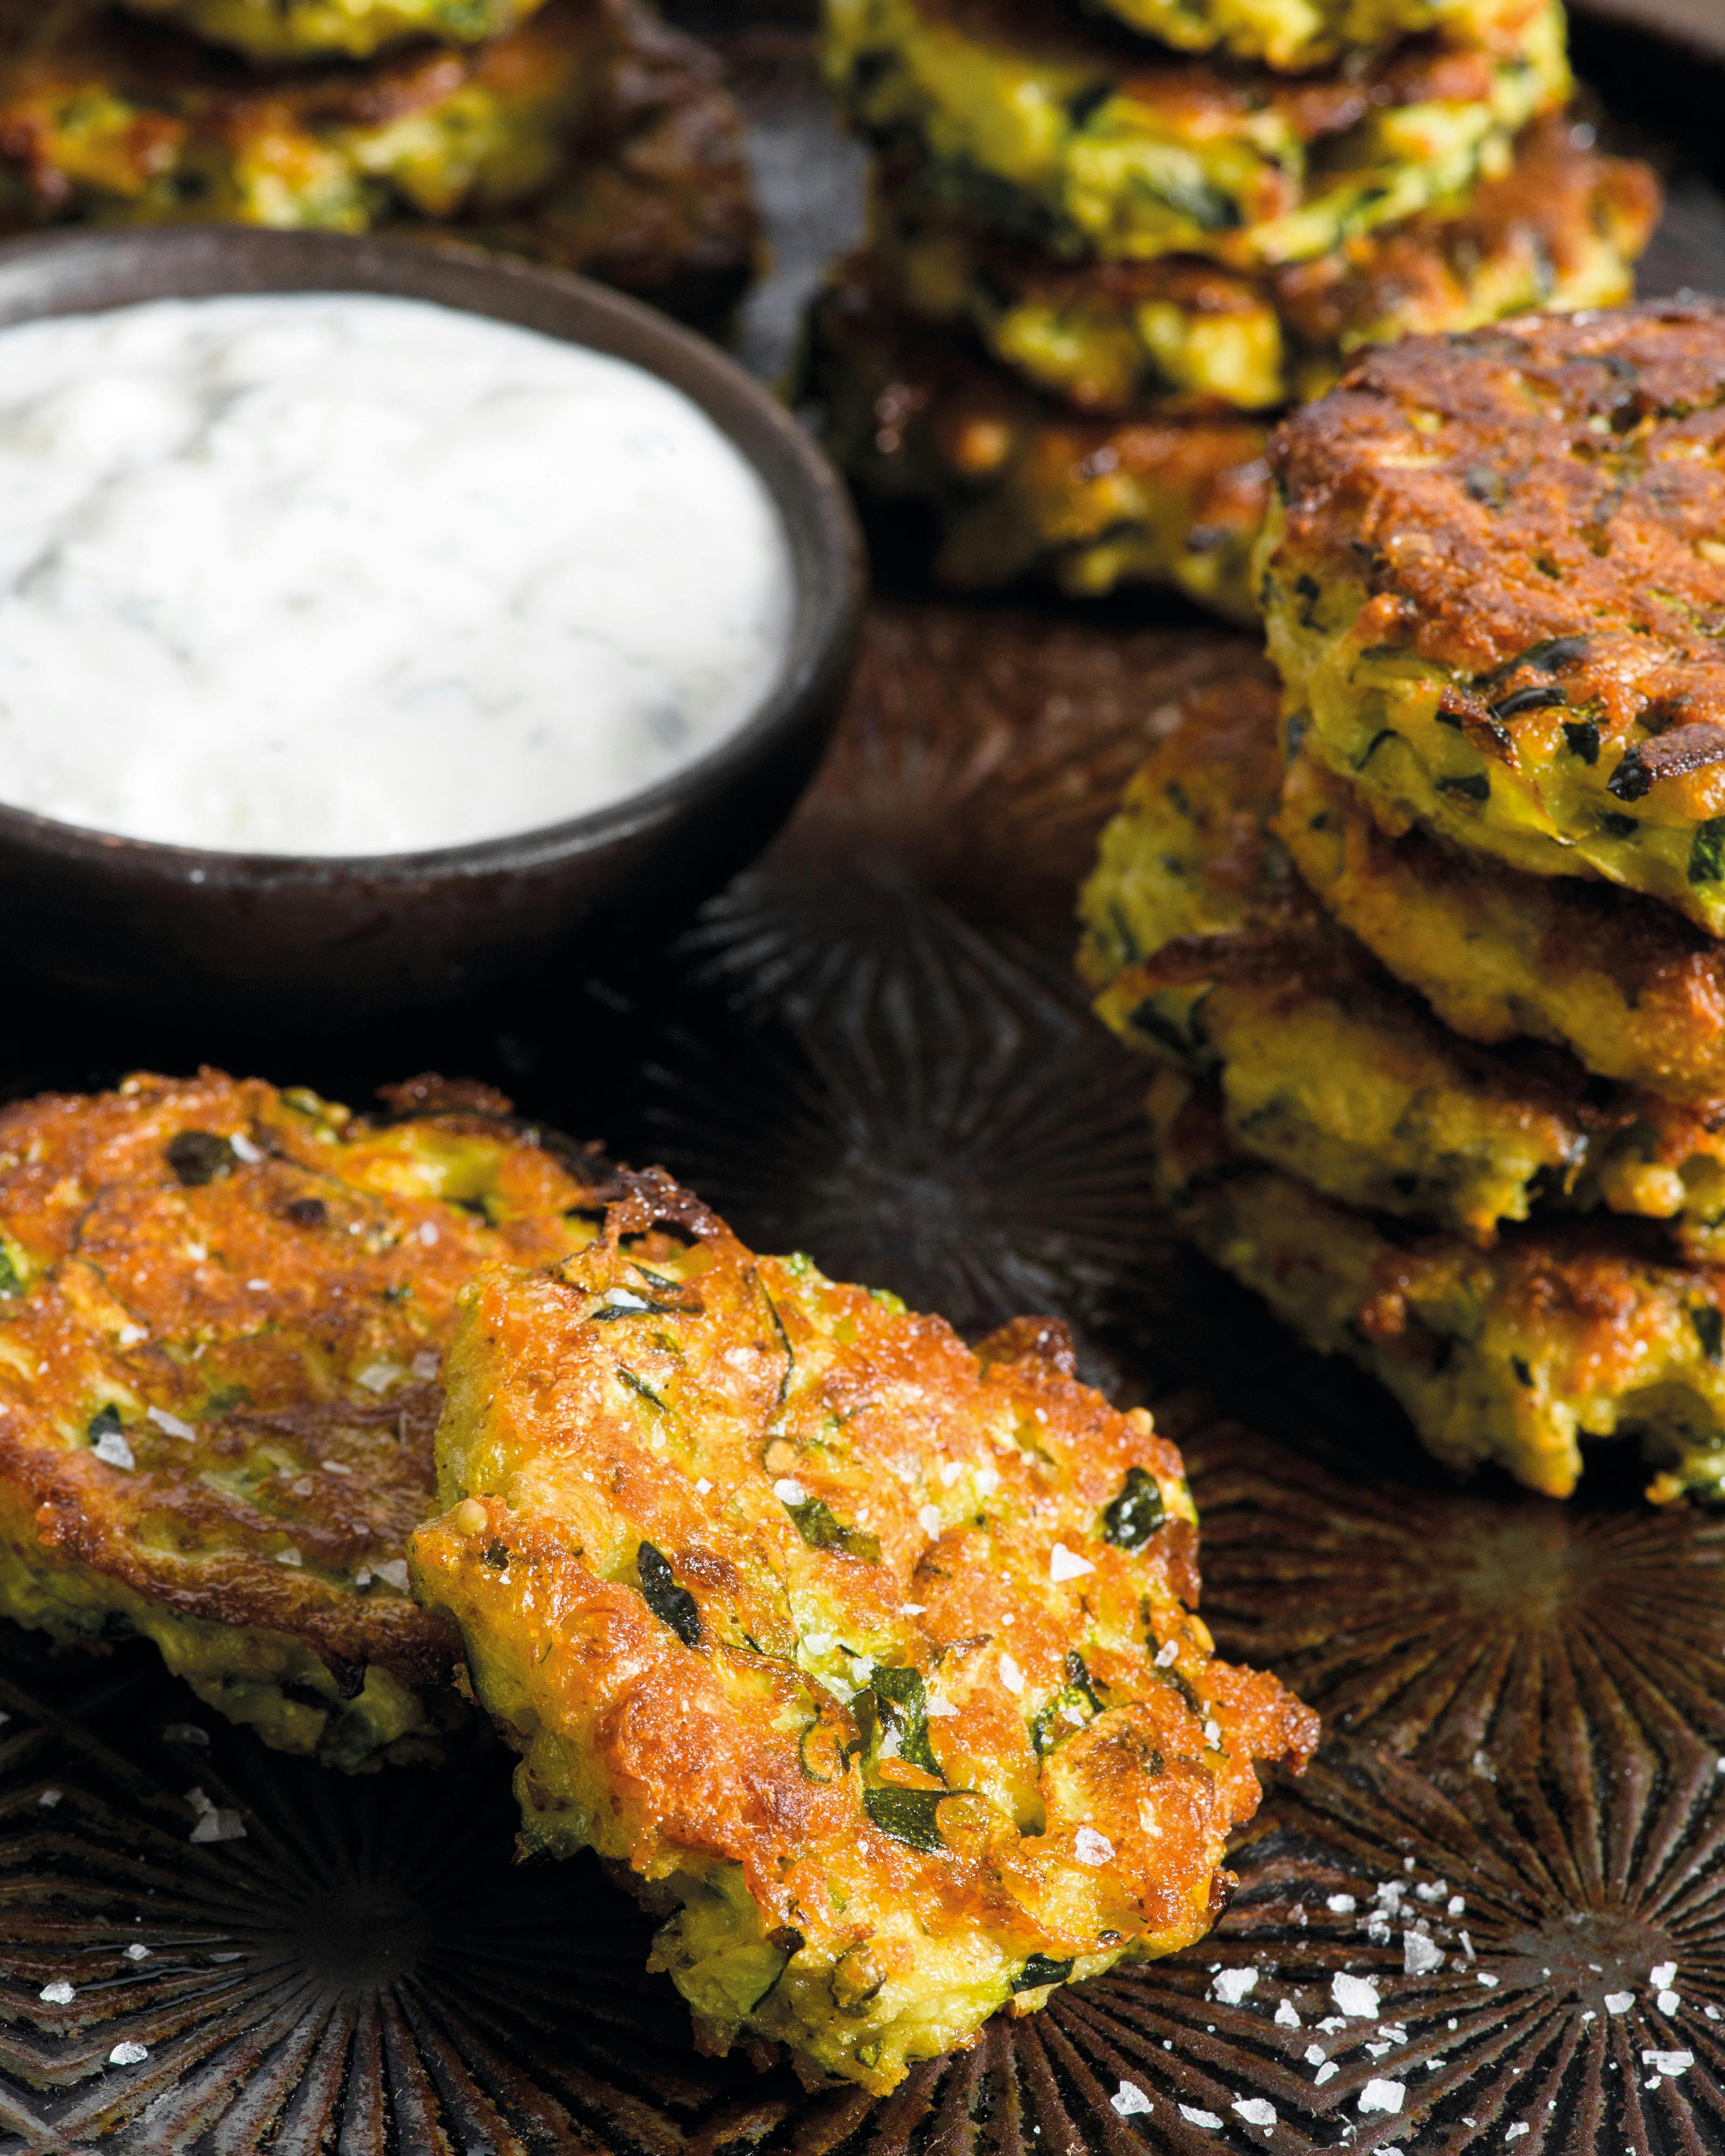 Baked zucchini fritters had vegetables to your spread.